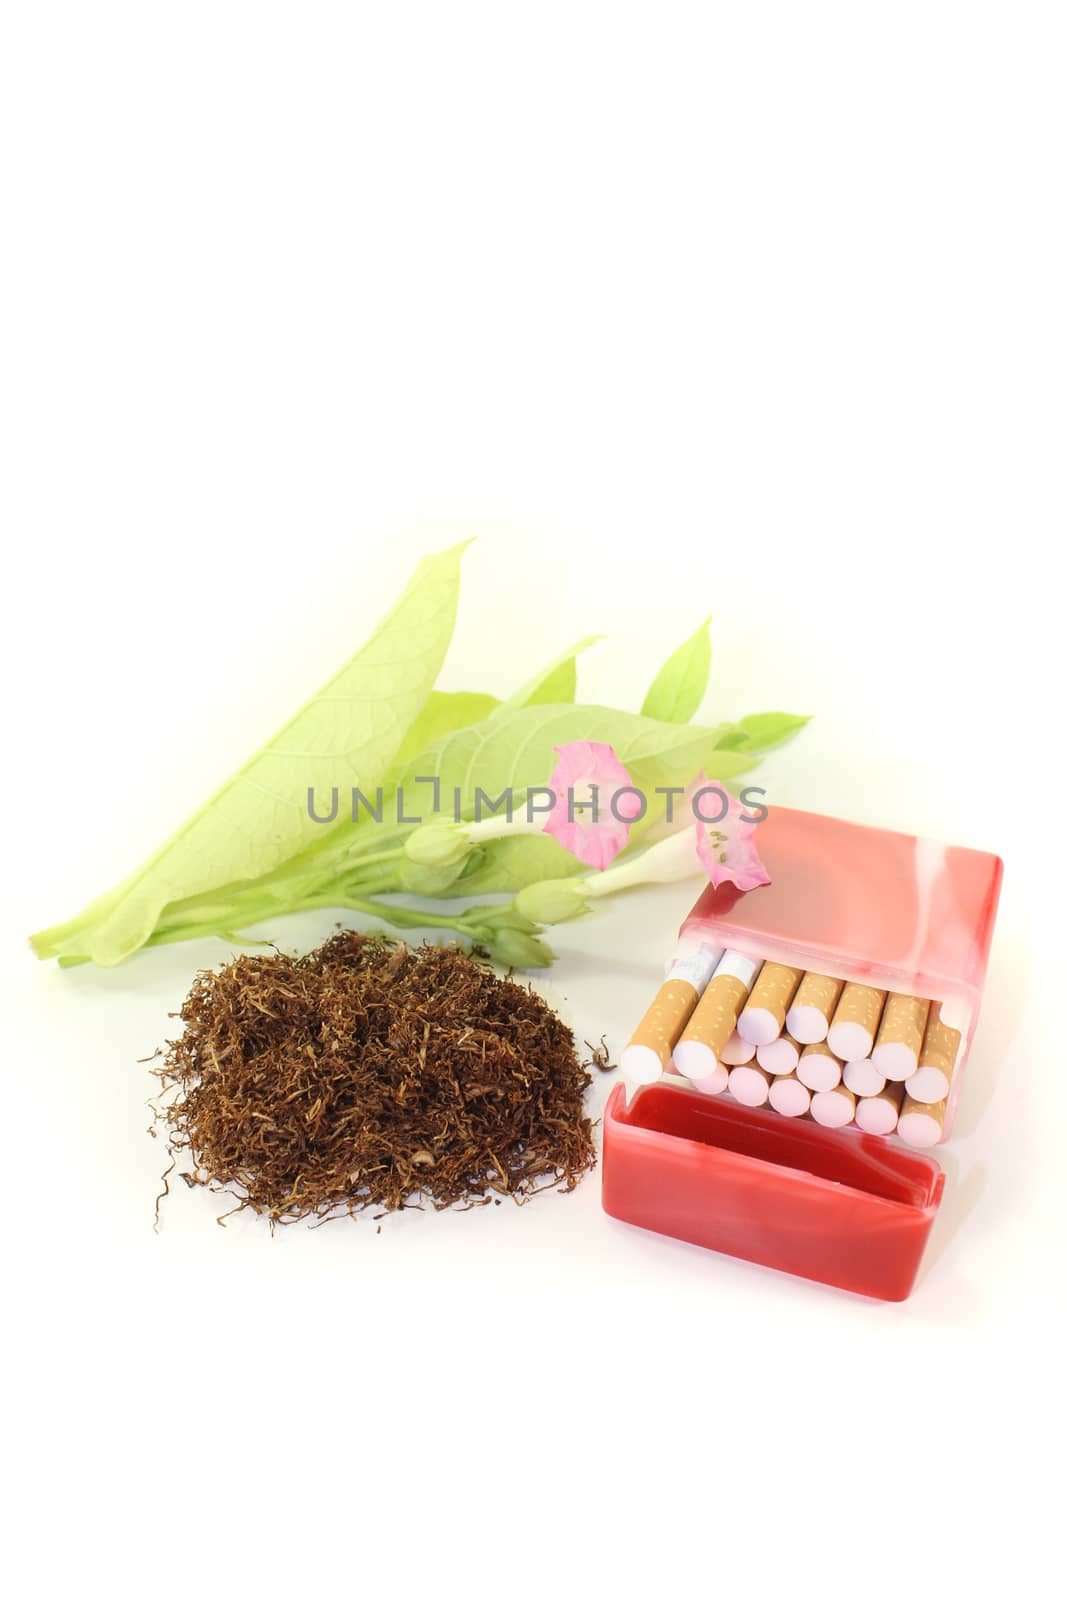 Tobacco with cigarettes case, leafs and blossoms on a light background